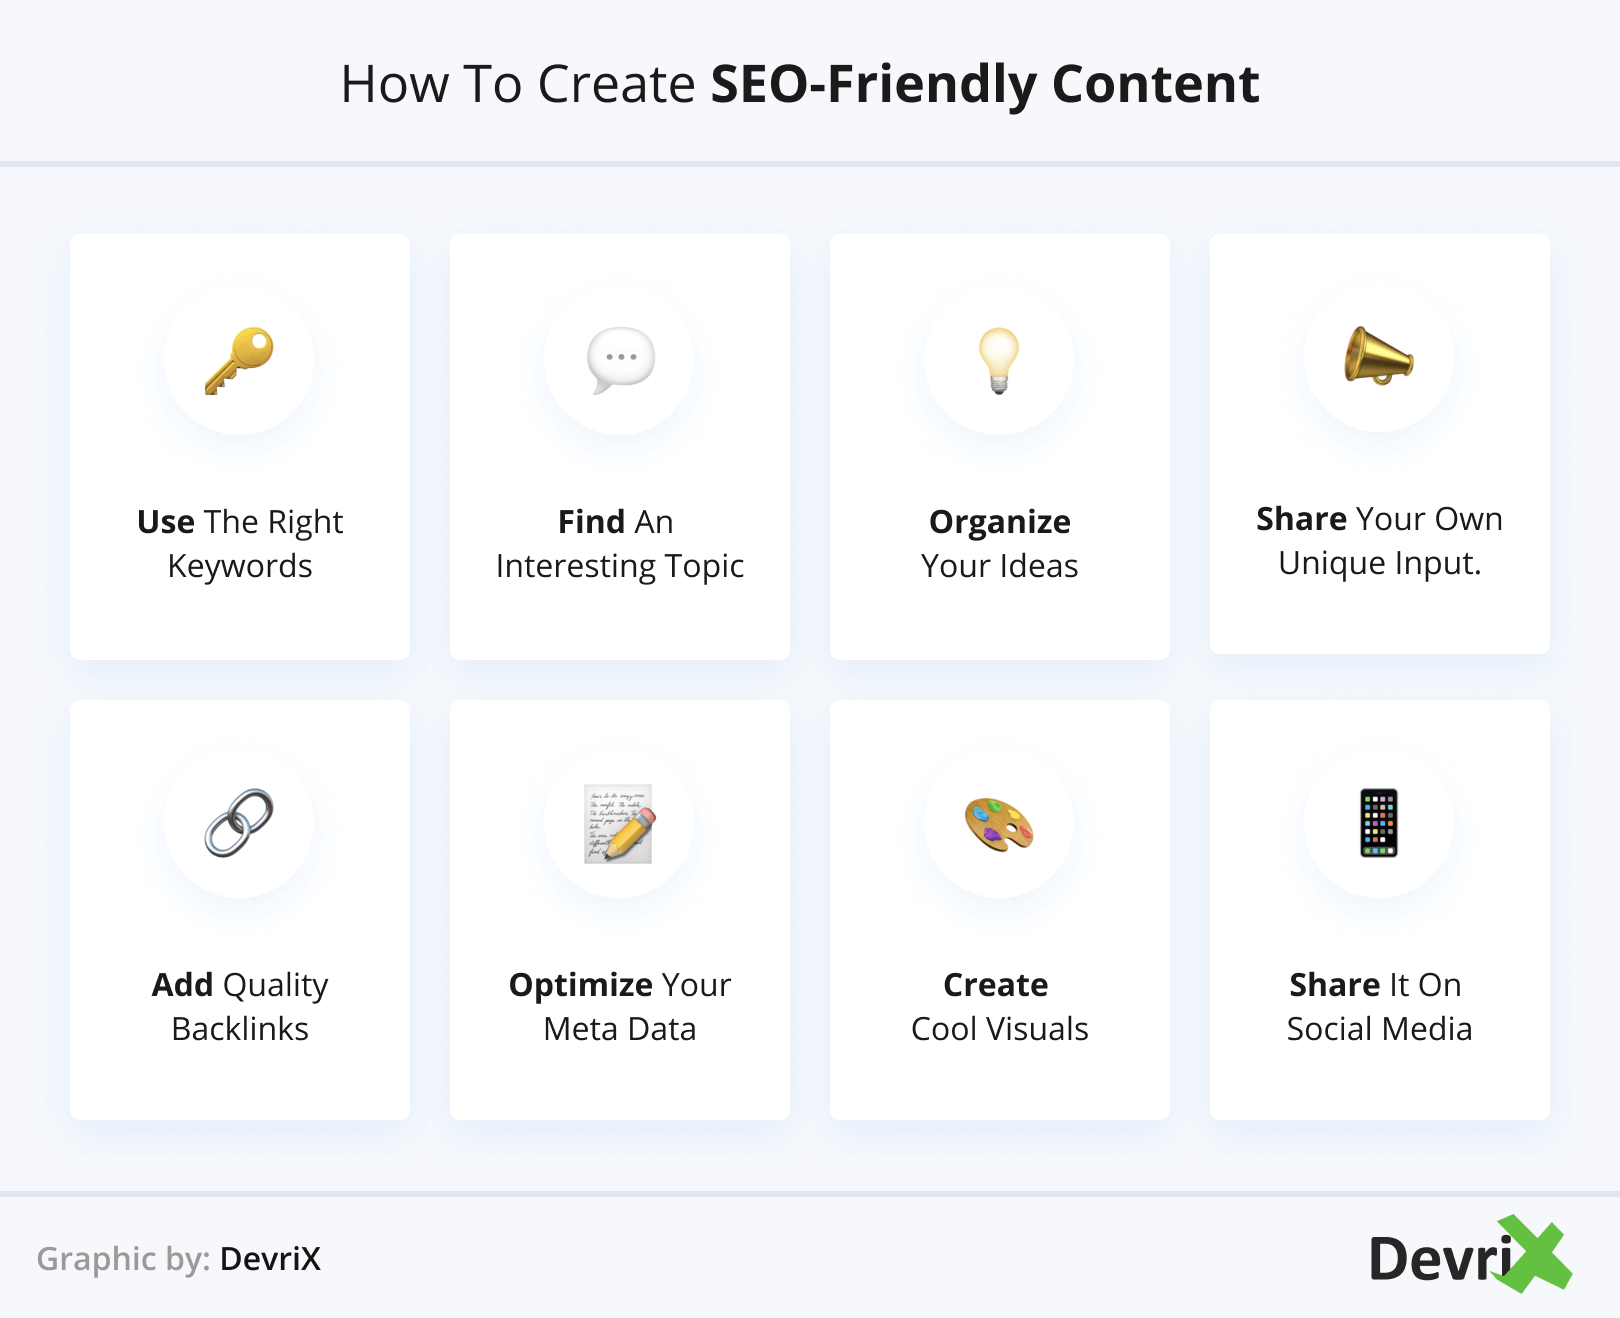 How to Create SEO-Friendly Content